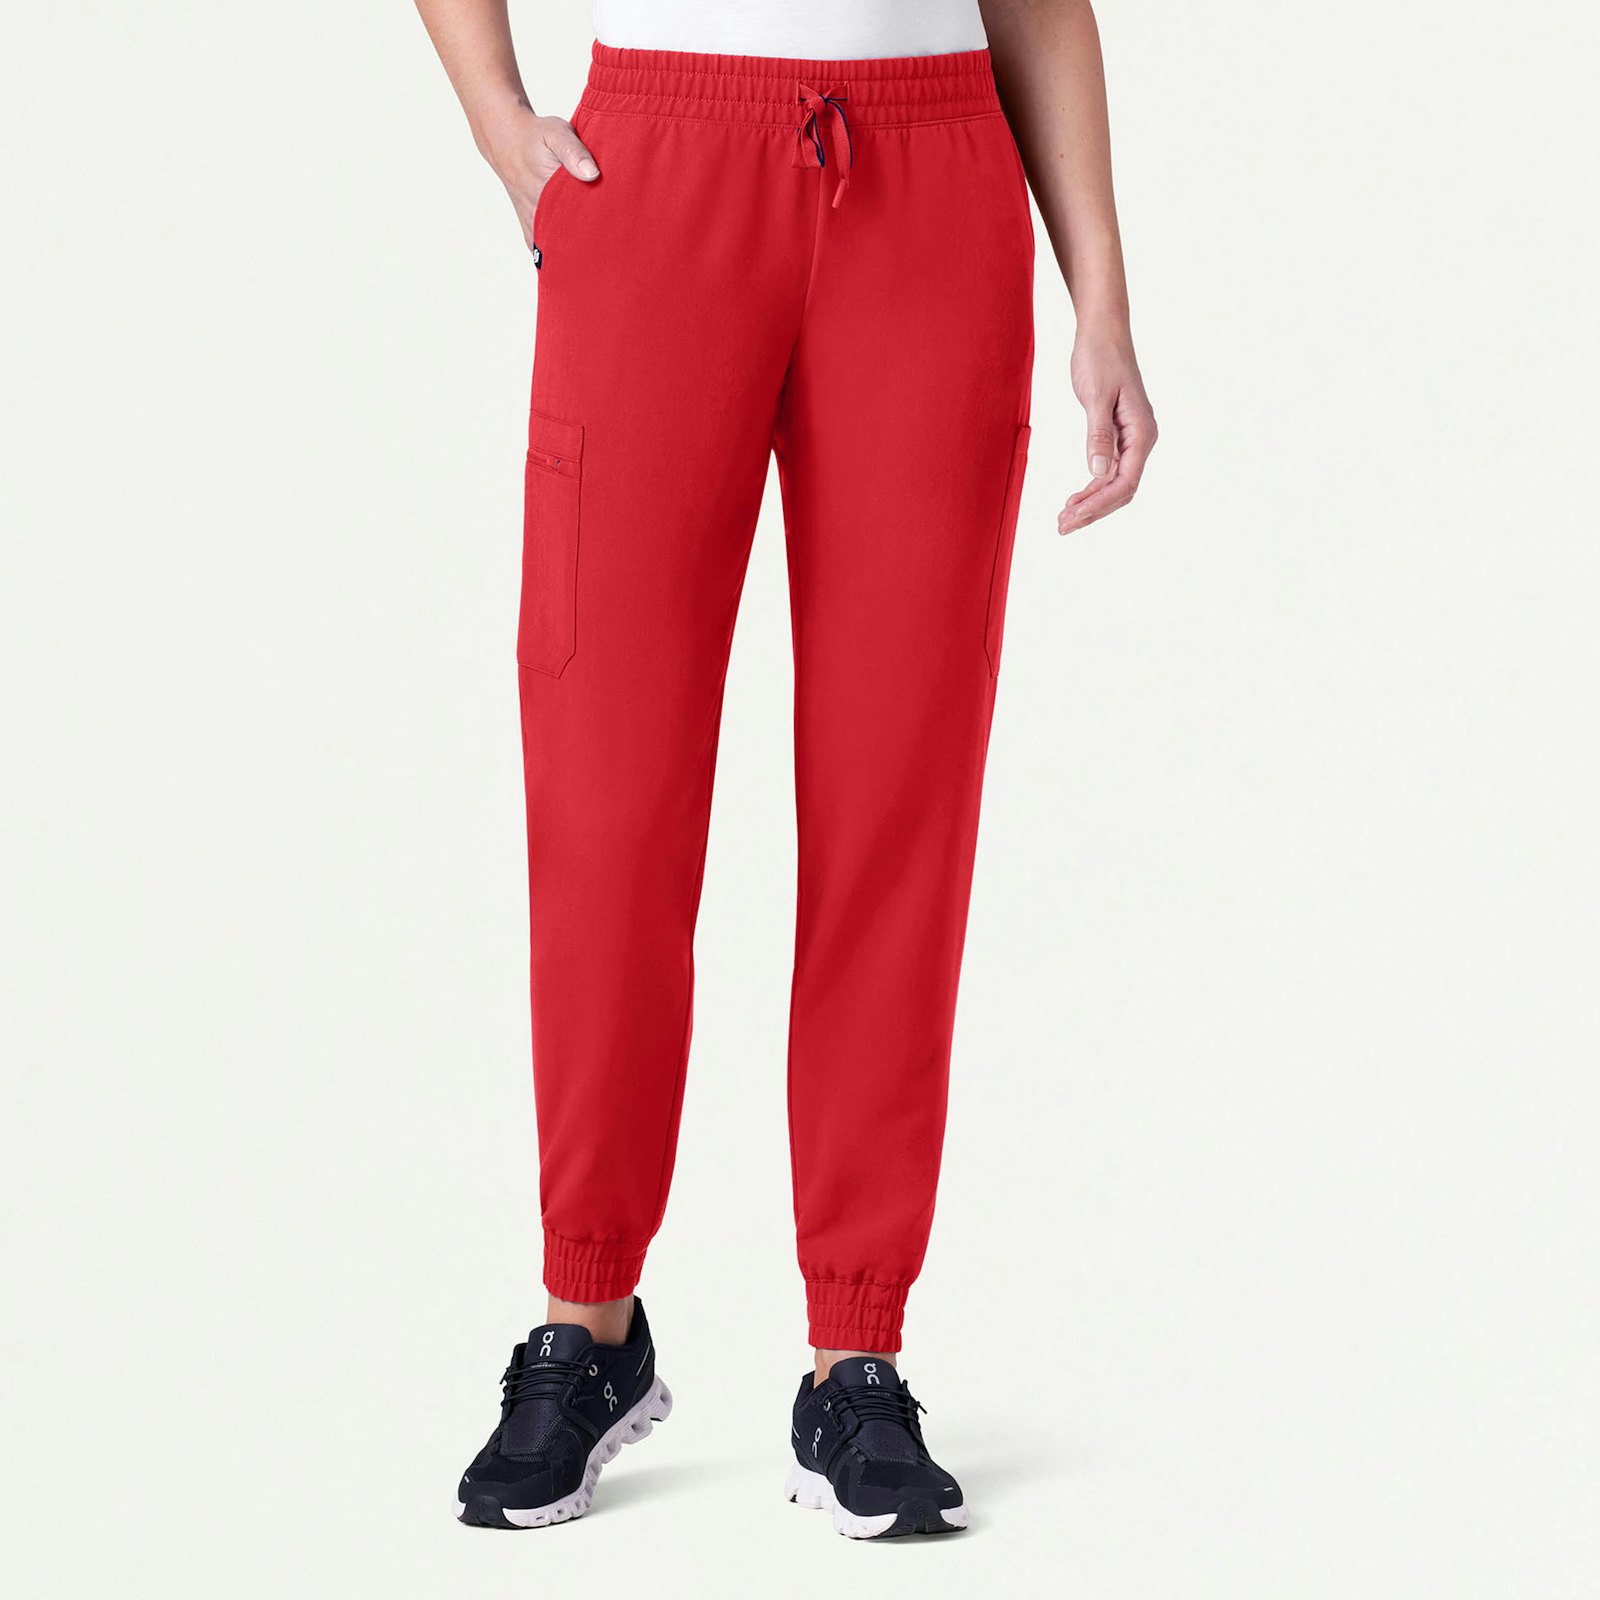 Neo Classic Scrub Jogger in Brilliant Red - Women's Pants by Jaanuu